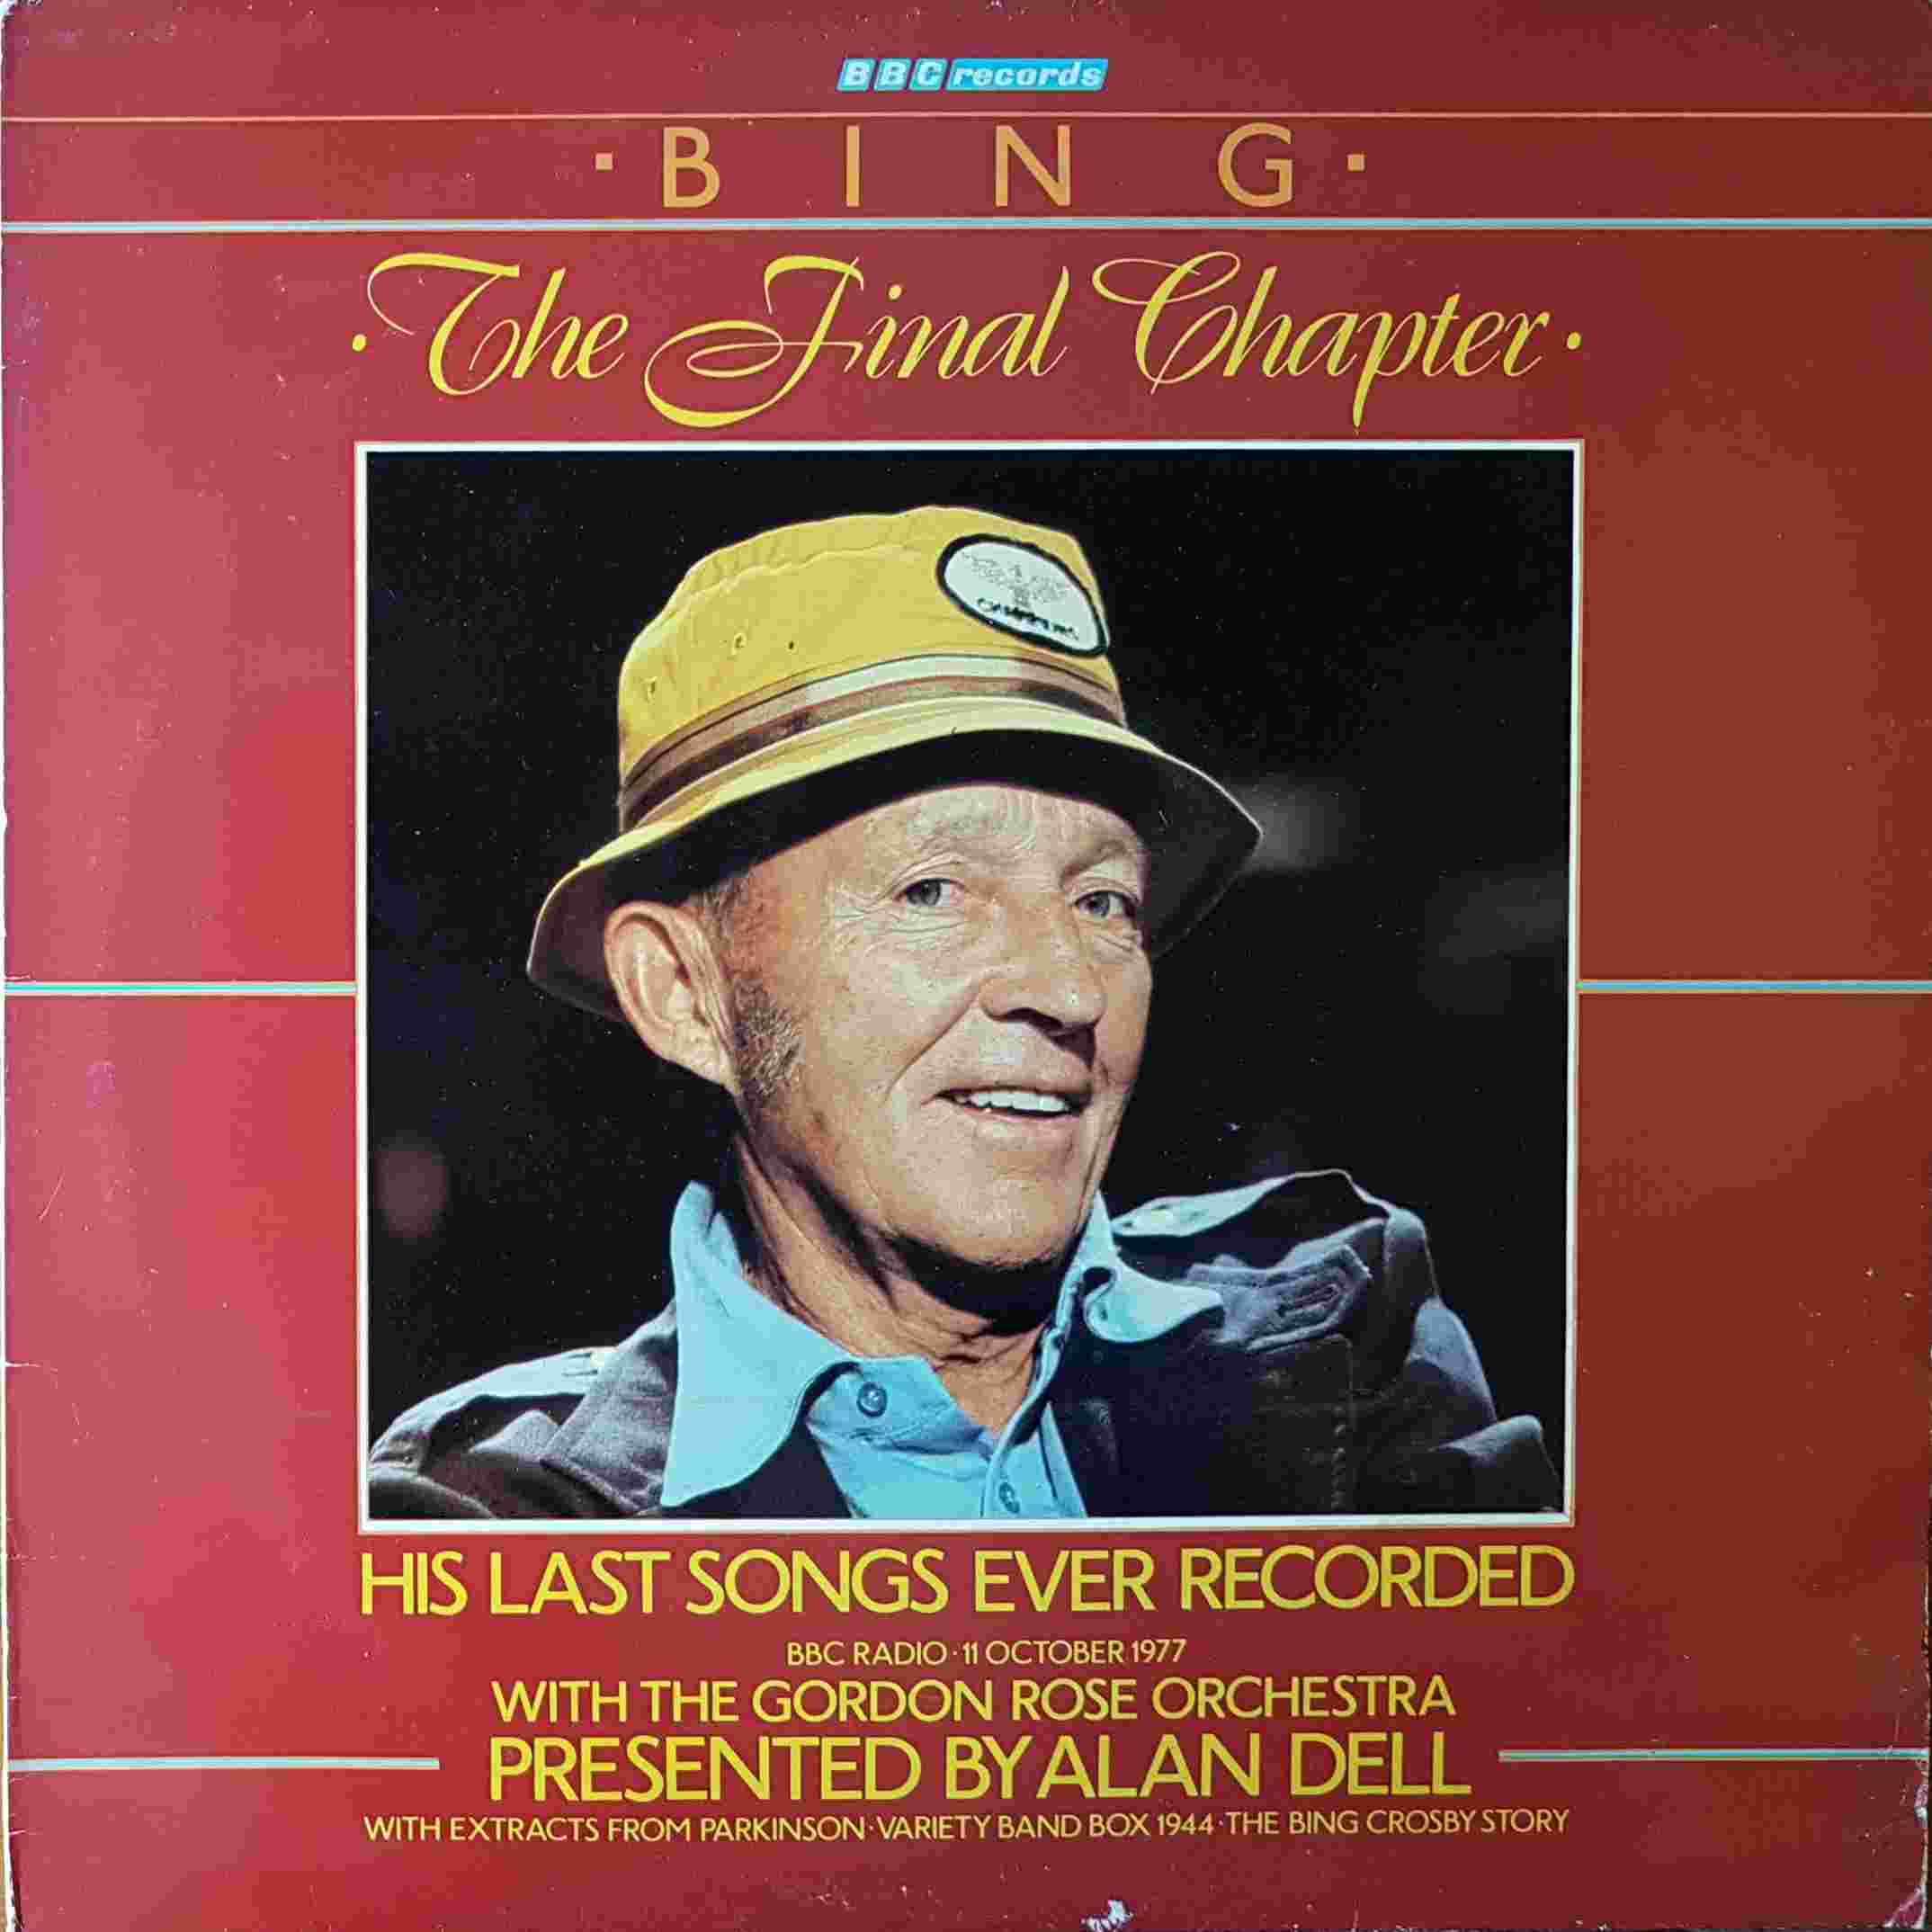 Picture of REB 398 Bing Crosby - The final chapter by artist Bing Crosby